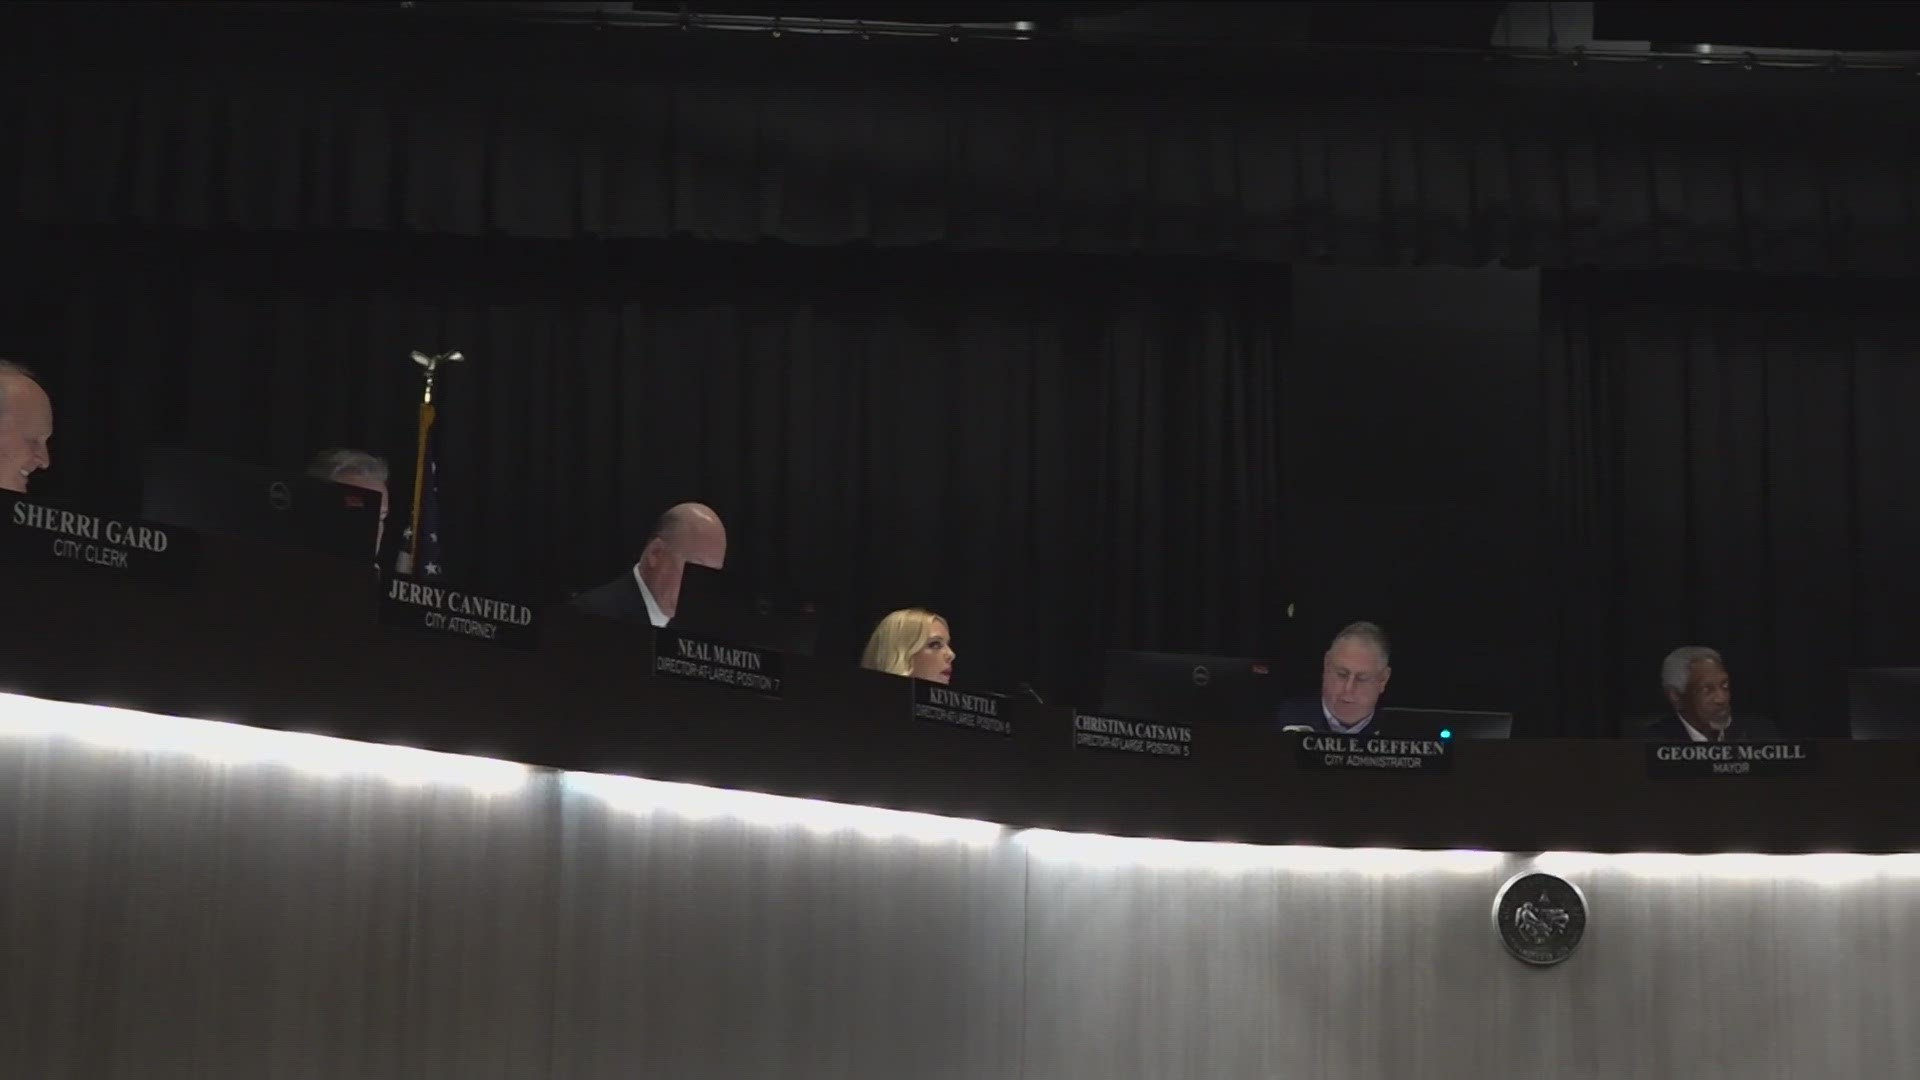 FORT SMITH CITY DIRECTORS ARE TAKING THE FIRST STEPS IN RECOMMENDING THAT THE FORT CHAFFEE REDEVELOPMENT AUTHORITY BE DISSOLVED...